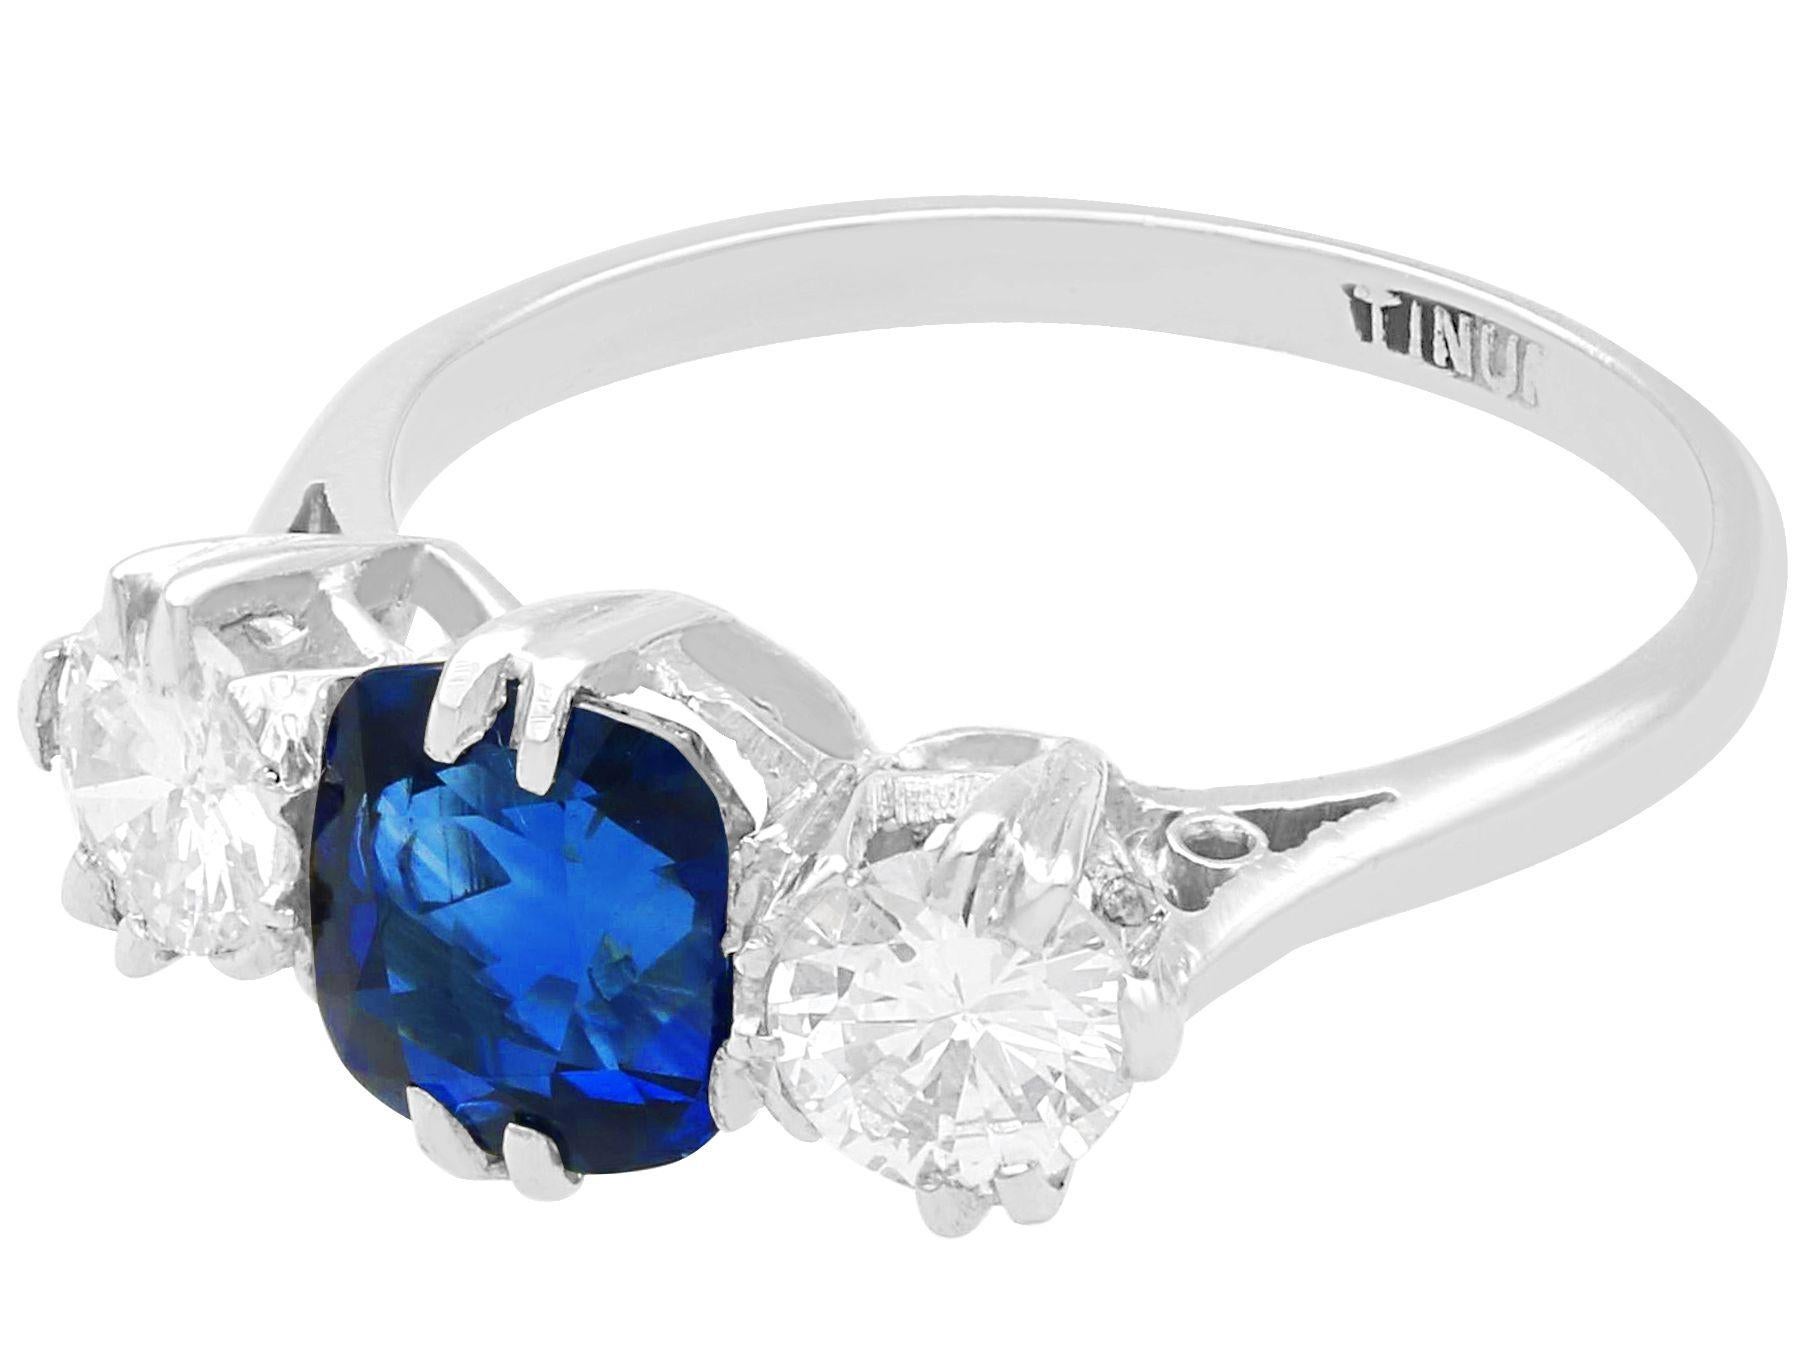 Cushion Cut Antique 1.33 Ct Basaltic Sapphire and 0.88 Ct Diamond Platinum Trilogy Ring For Sale